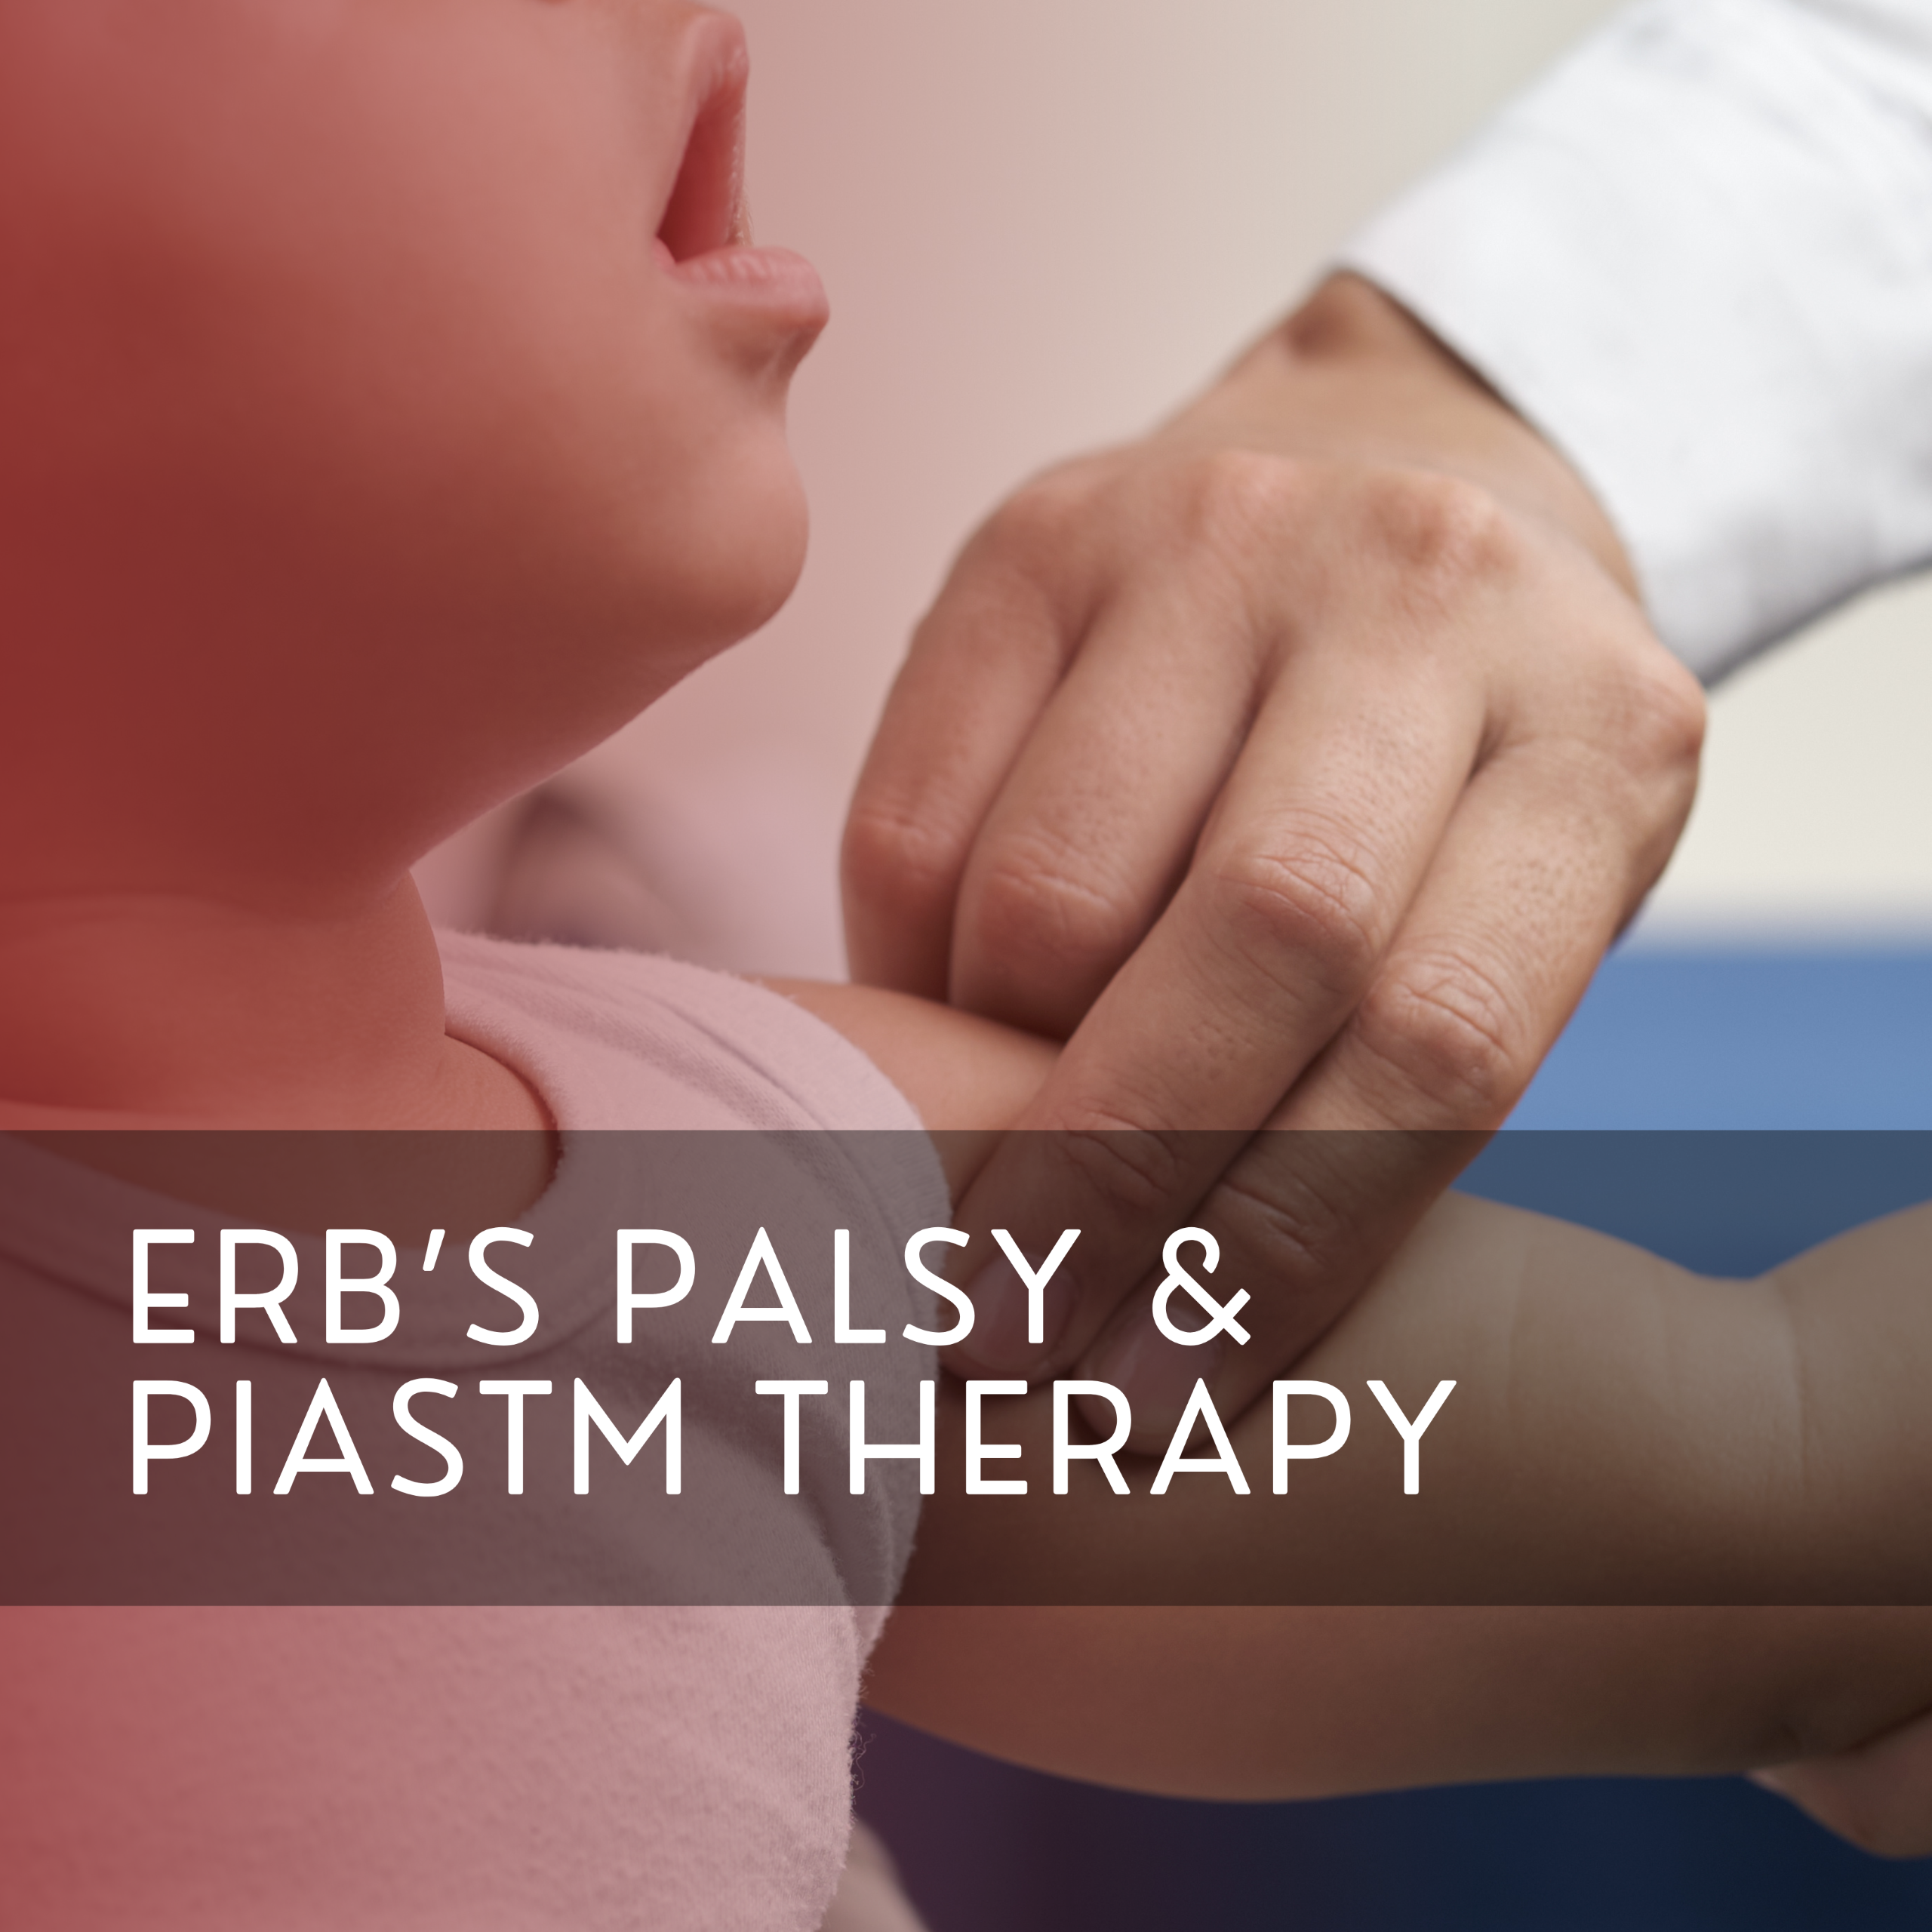 PIASTM Therapy: A Promising Approach for Erb’s Palsy Management